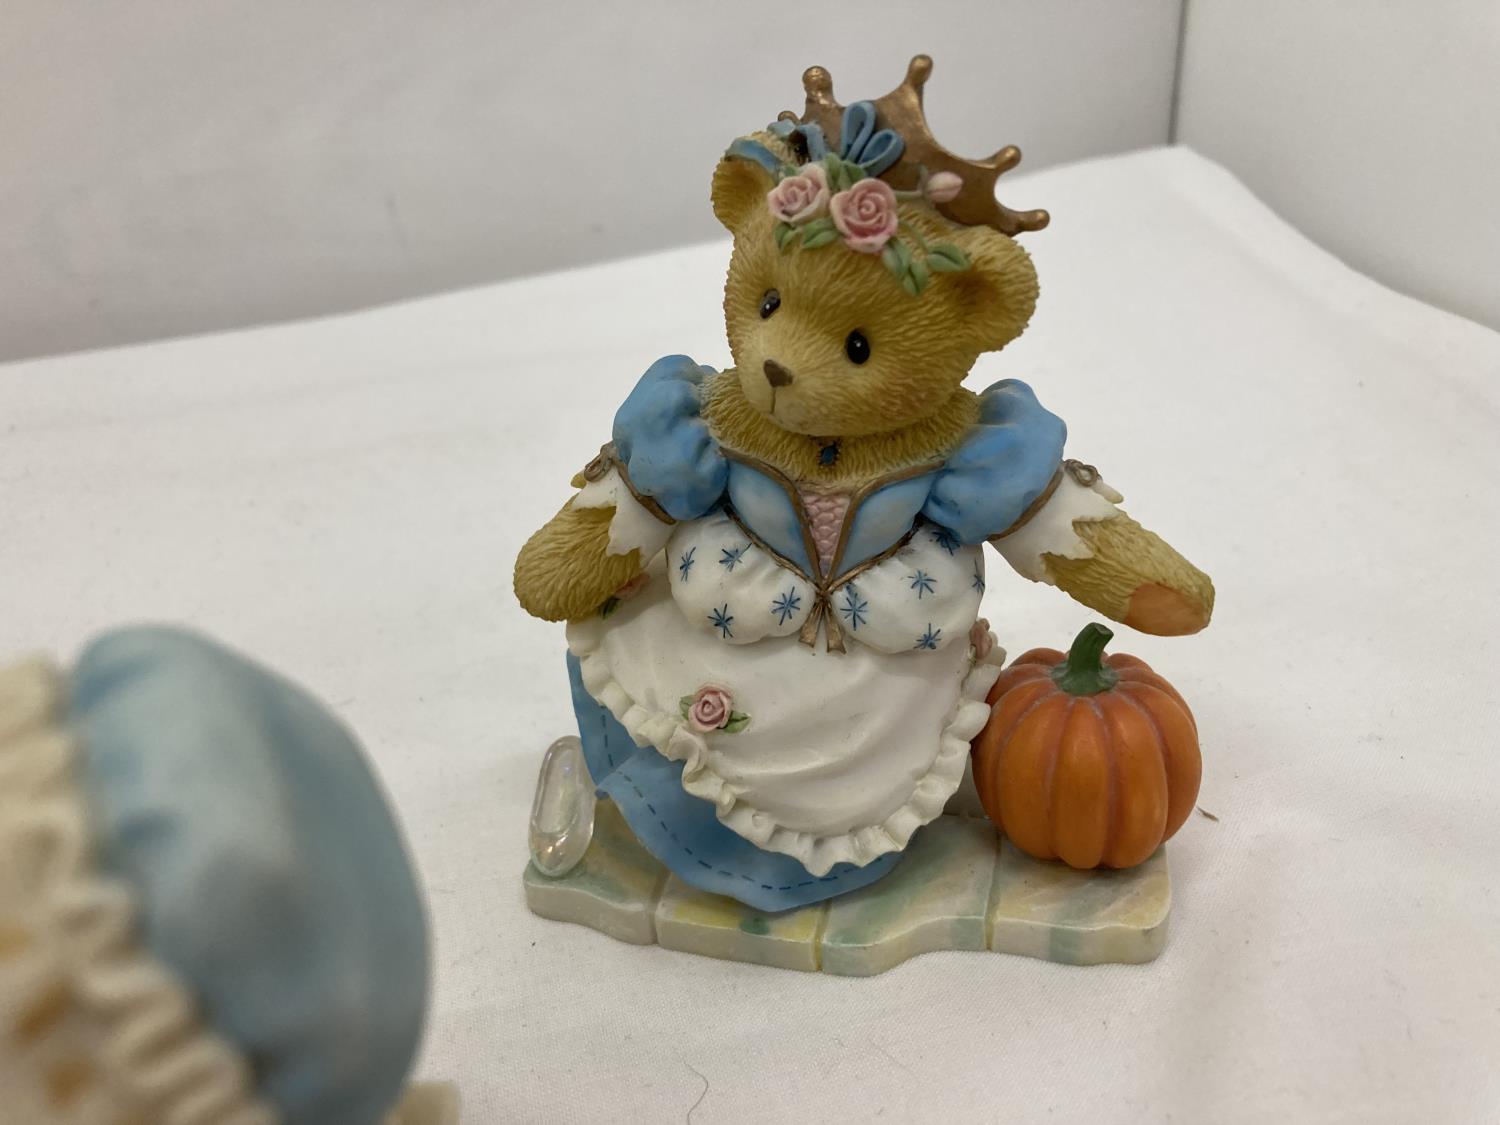 FOUR LIMITED EDITION CHERISHED TEDDIES, 'CHRISTINA', 'ROBIN', 'HALEY AND LOGAN', AND 'JUDY' - Image 7 of 12